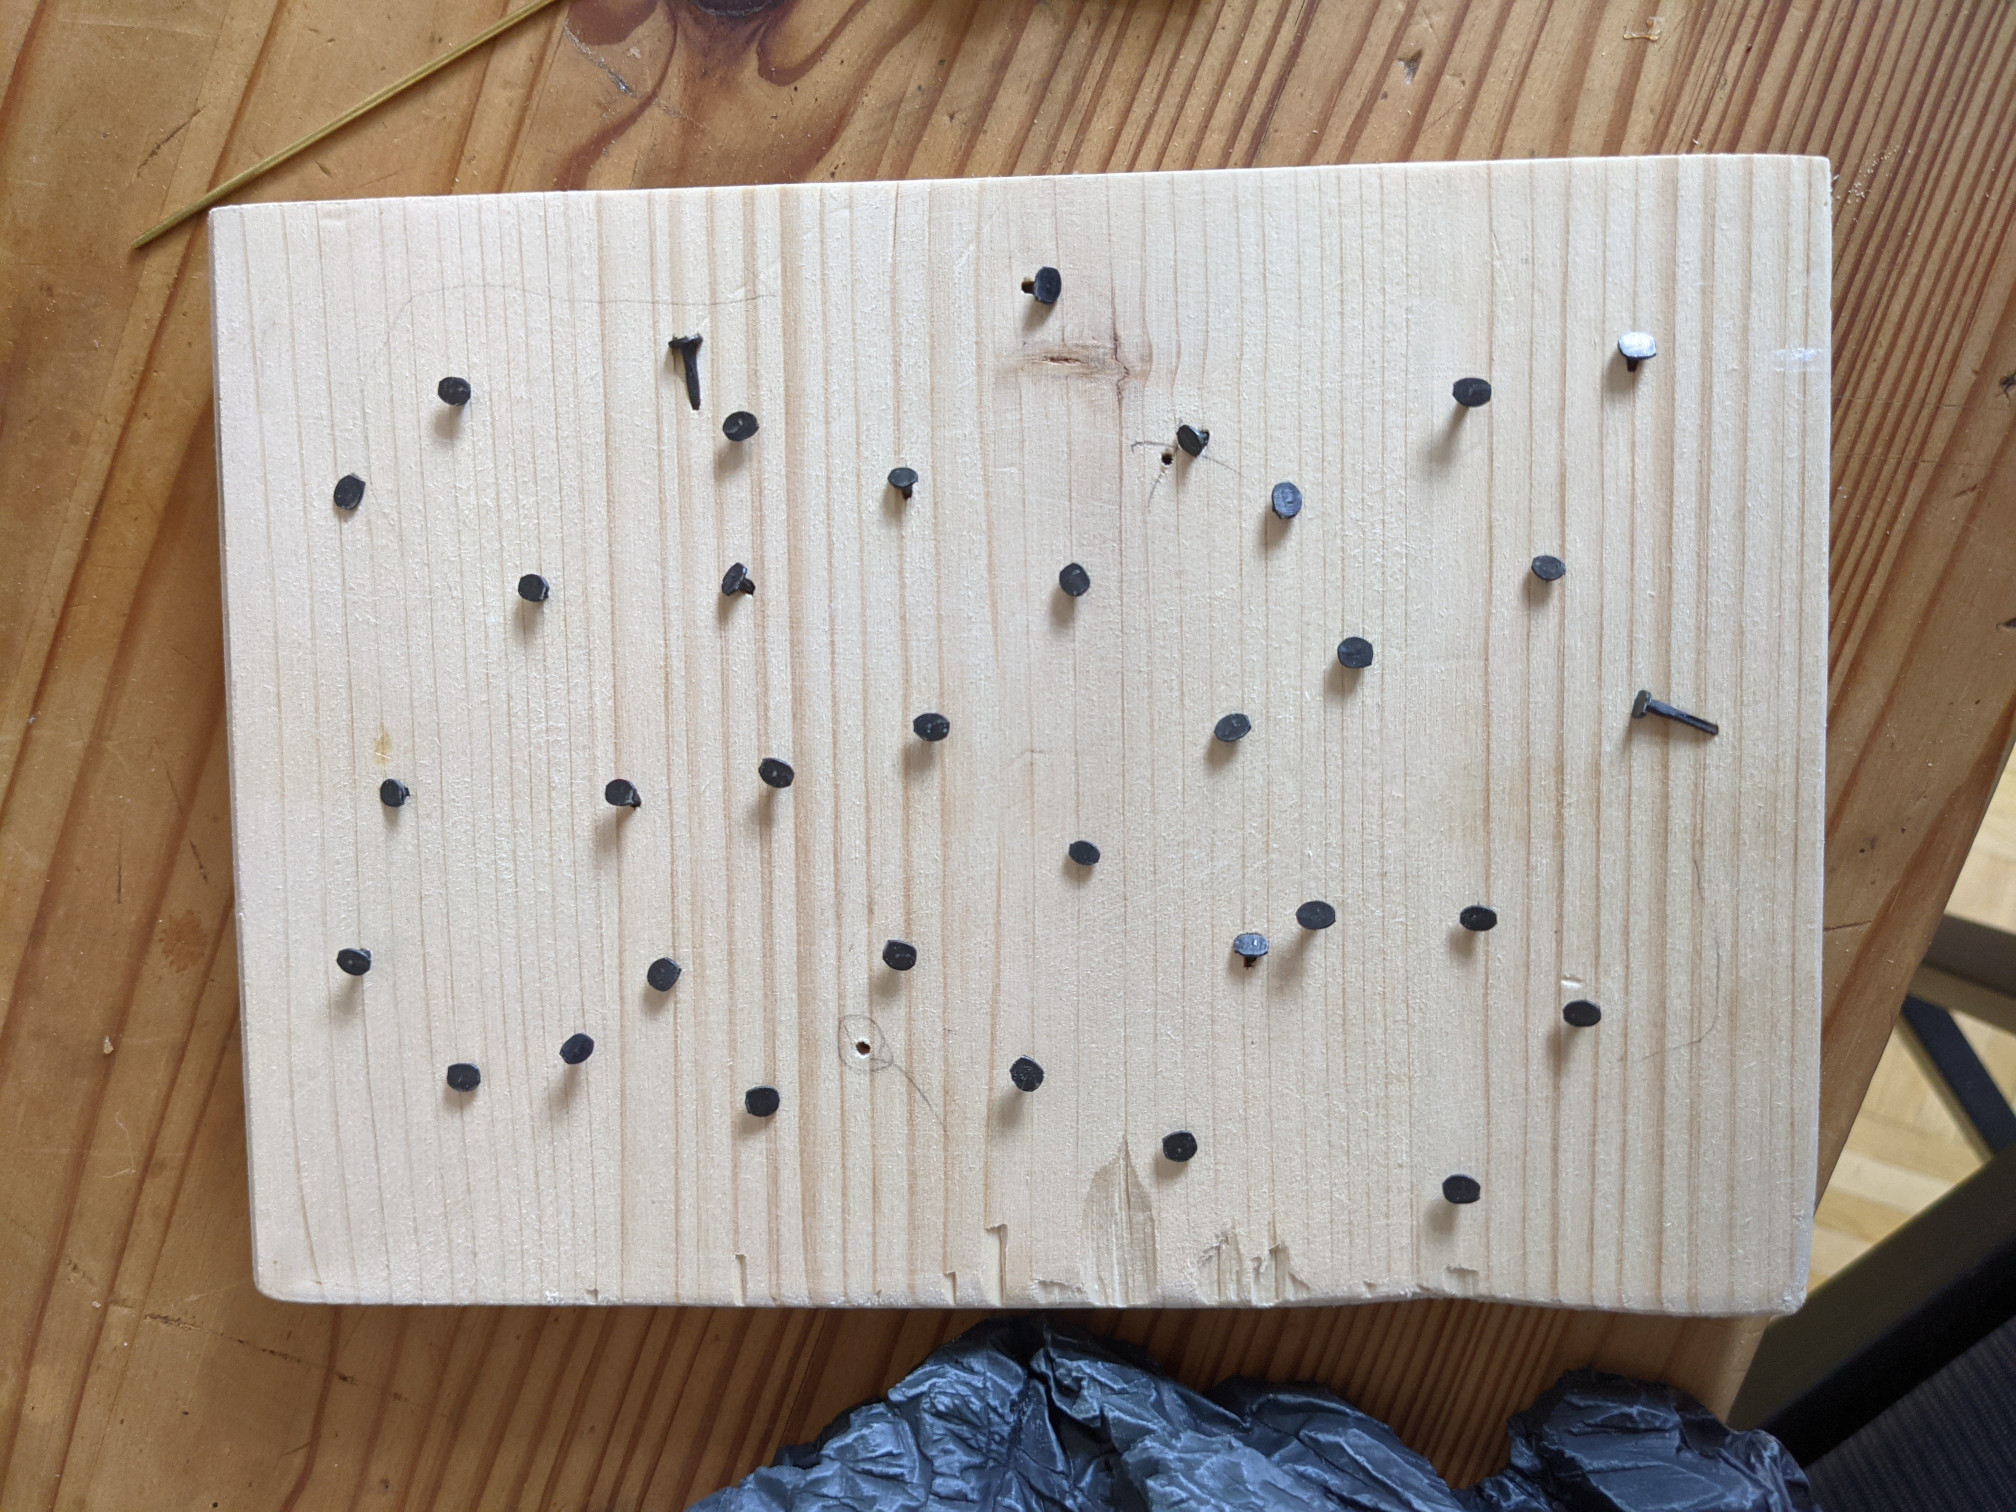 I was afraid plaster wouldn't stick to the wood enough so I have hammered some short nails into the wood and left their heads sticking out a millimetre or two.